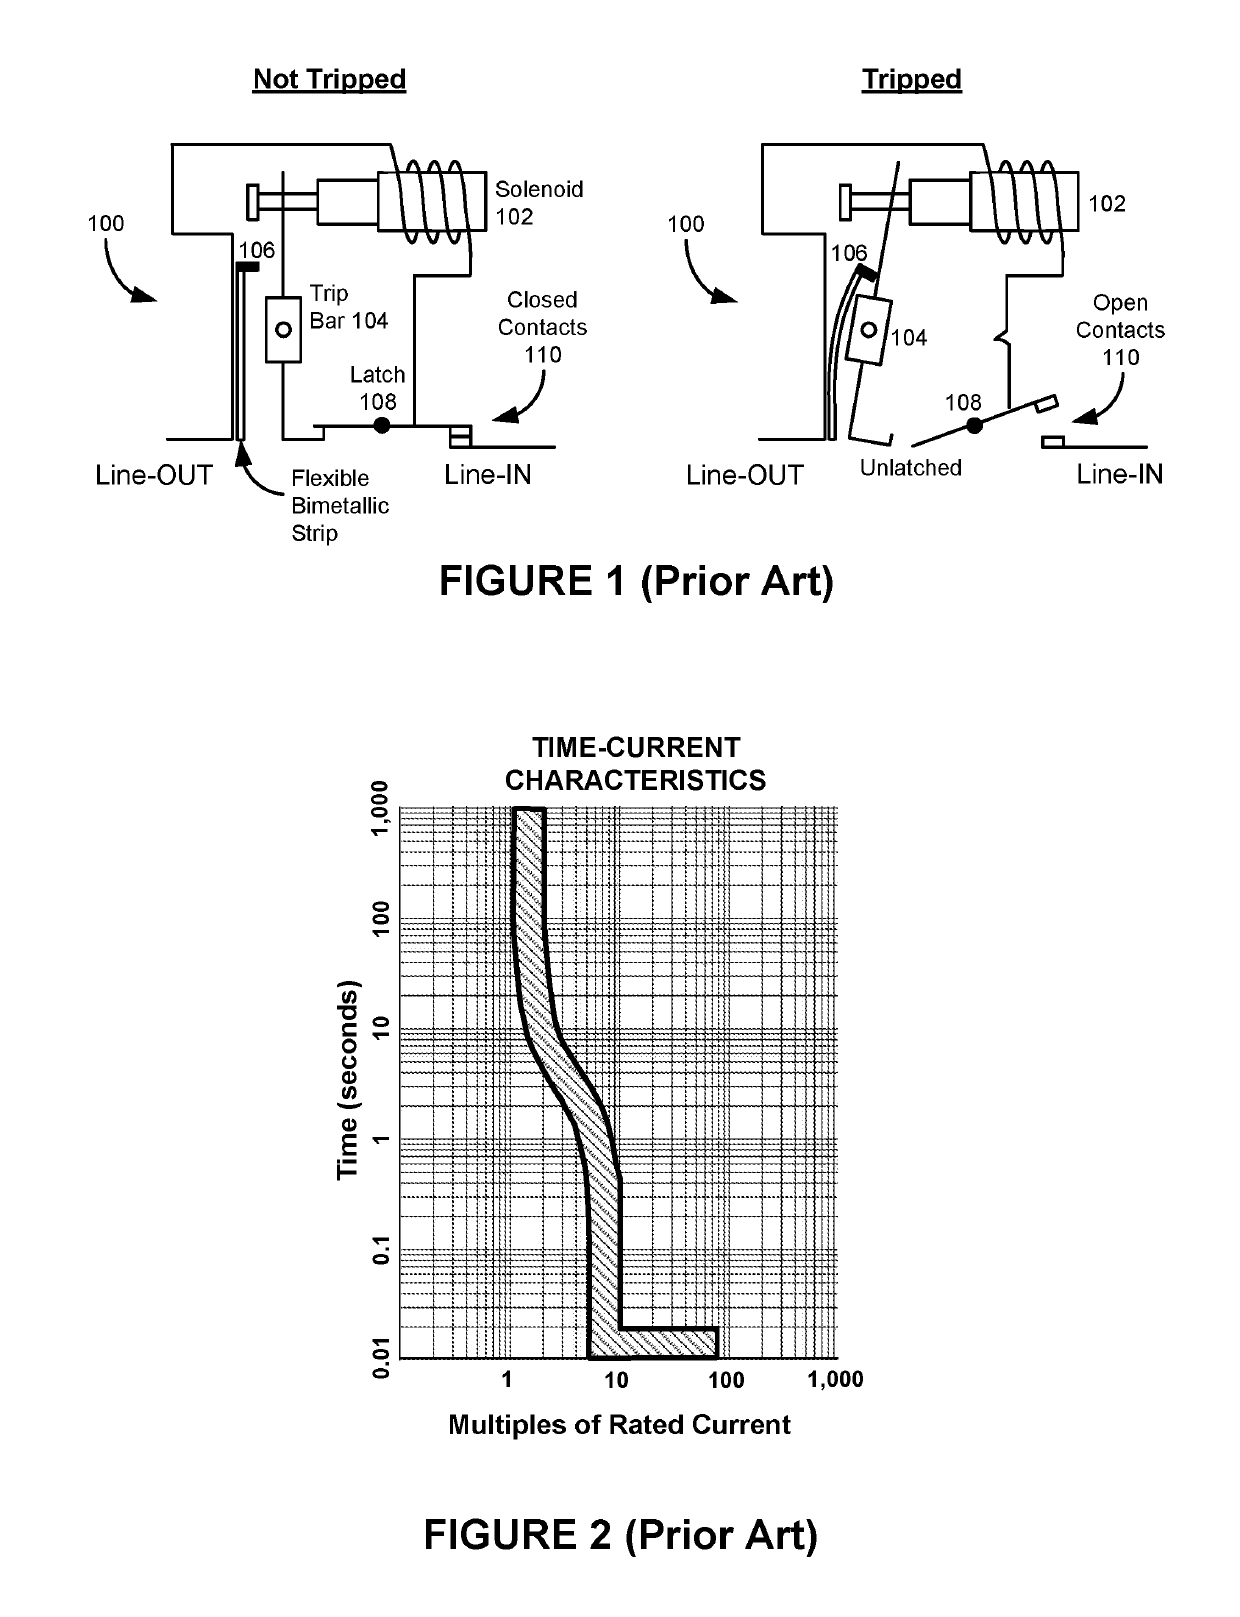 Solid-state circuit interrupter and arc inhibitor